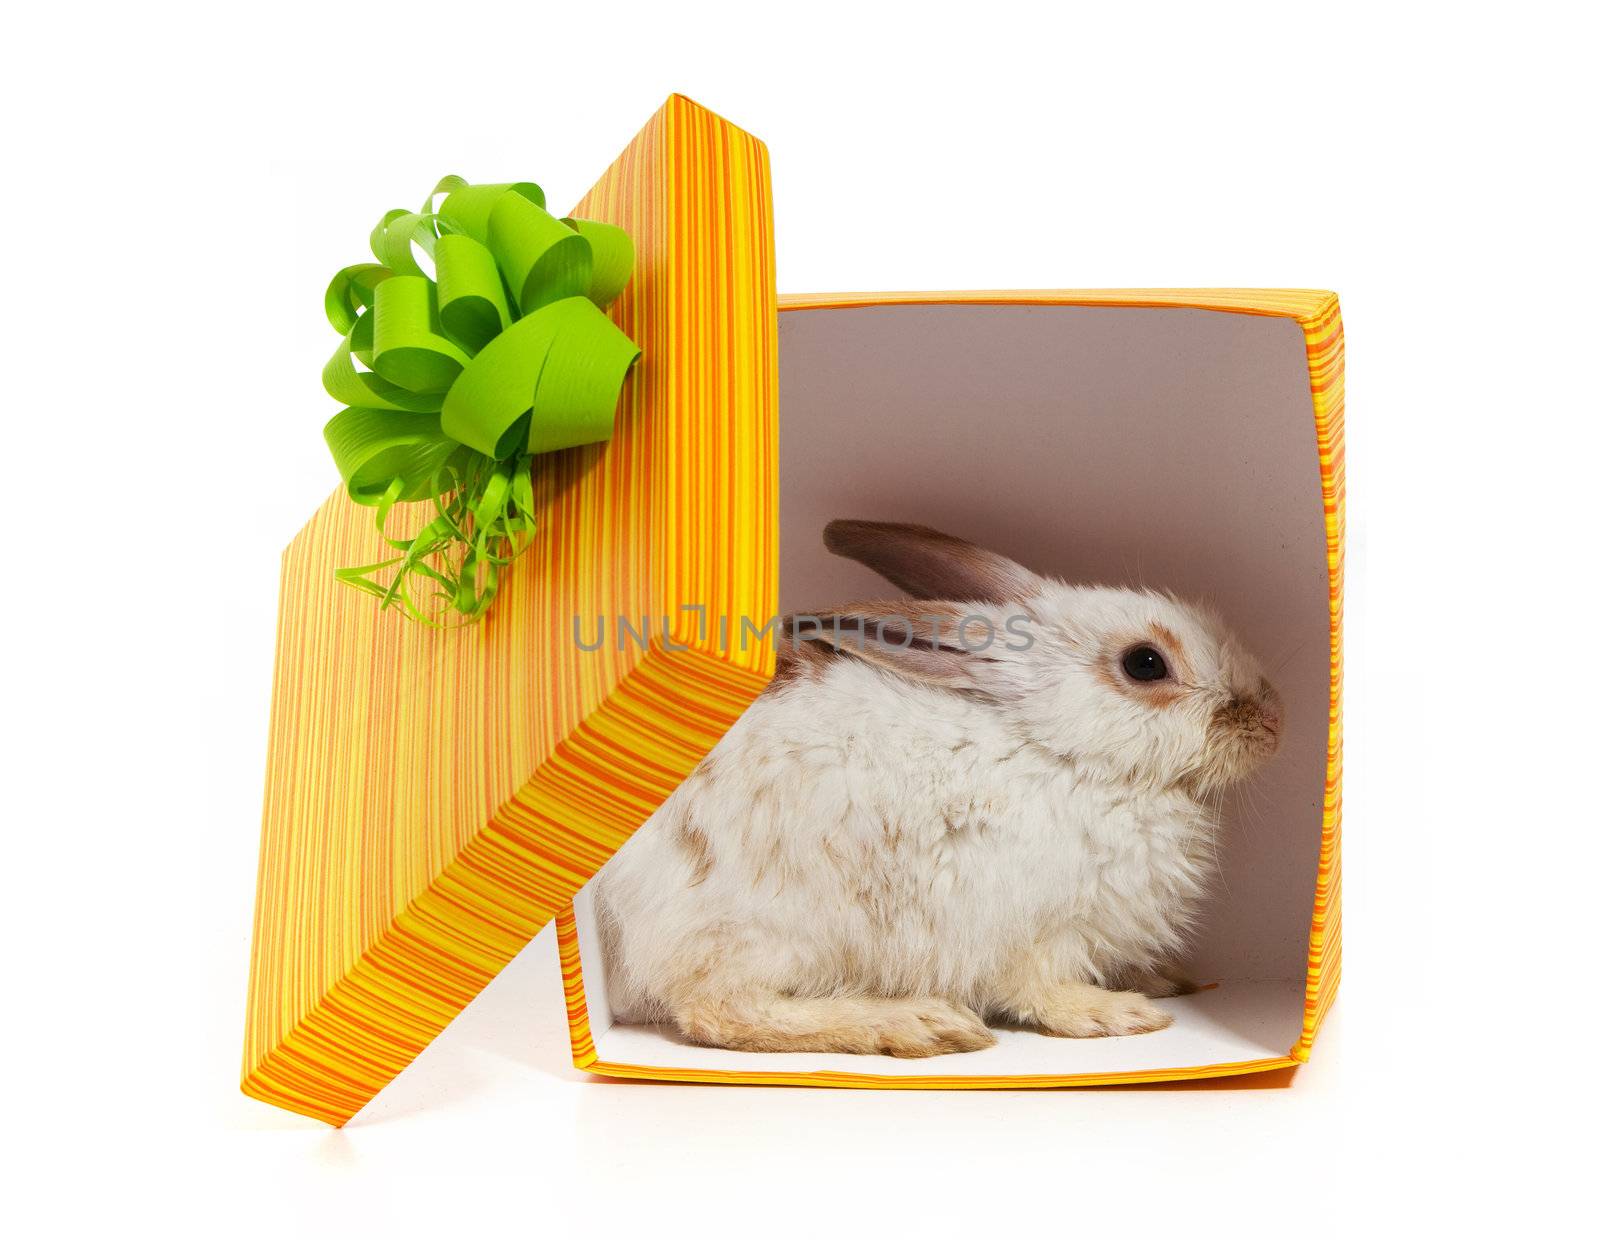 The rabbit in the yellow box by bloodua